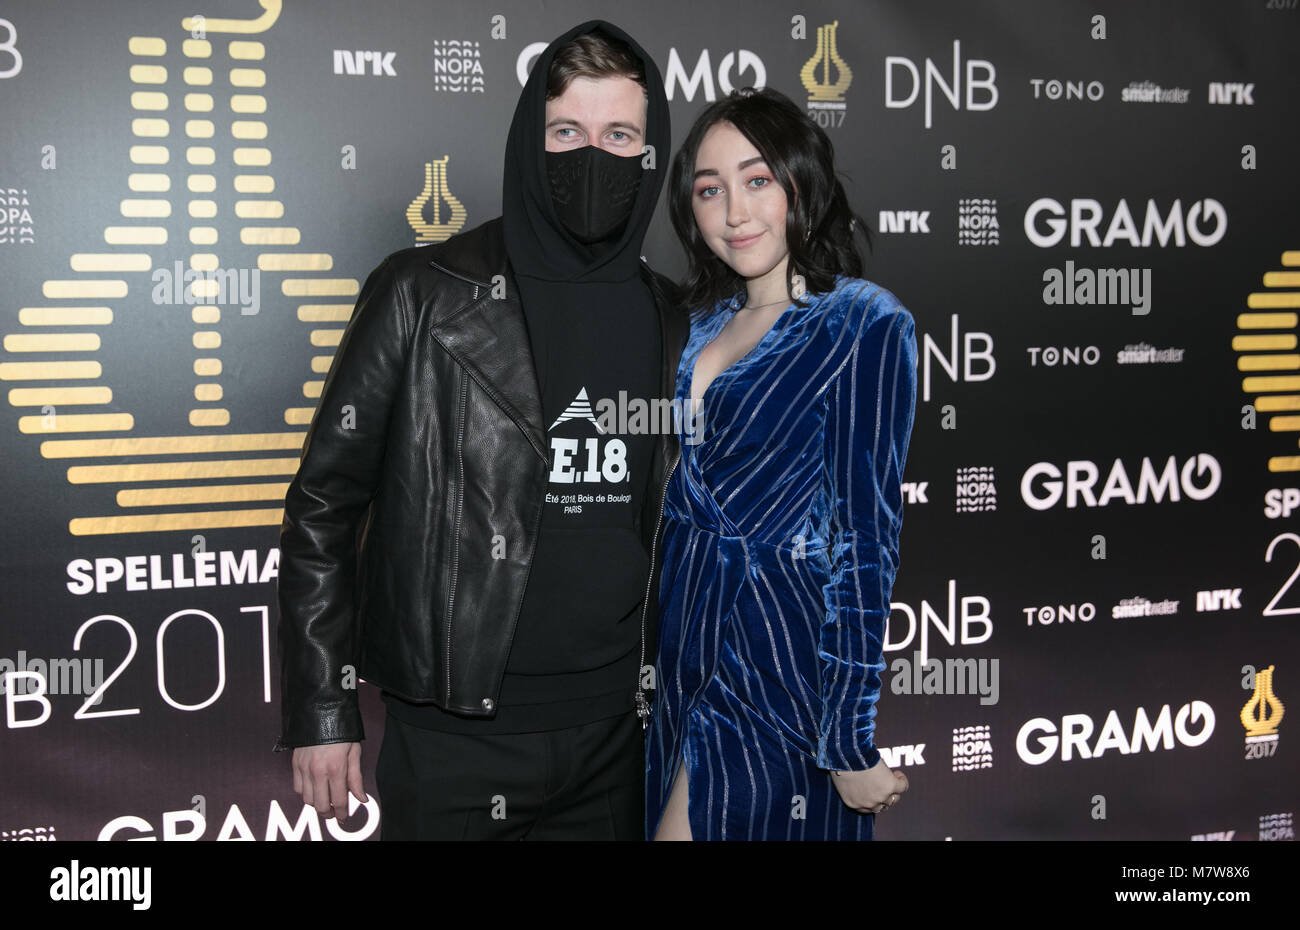 Norway Oslo February 25 18 The Norwegian Record Producer Alan Walker And American Singer Noah Cyrus Are Seen At The Red Carpet At The Norwegian Grammy Awards Spellemannprisen 17 In Oslo